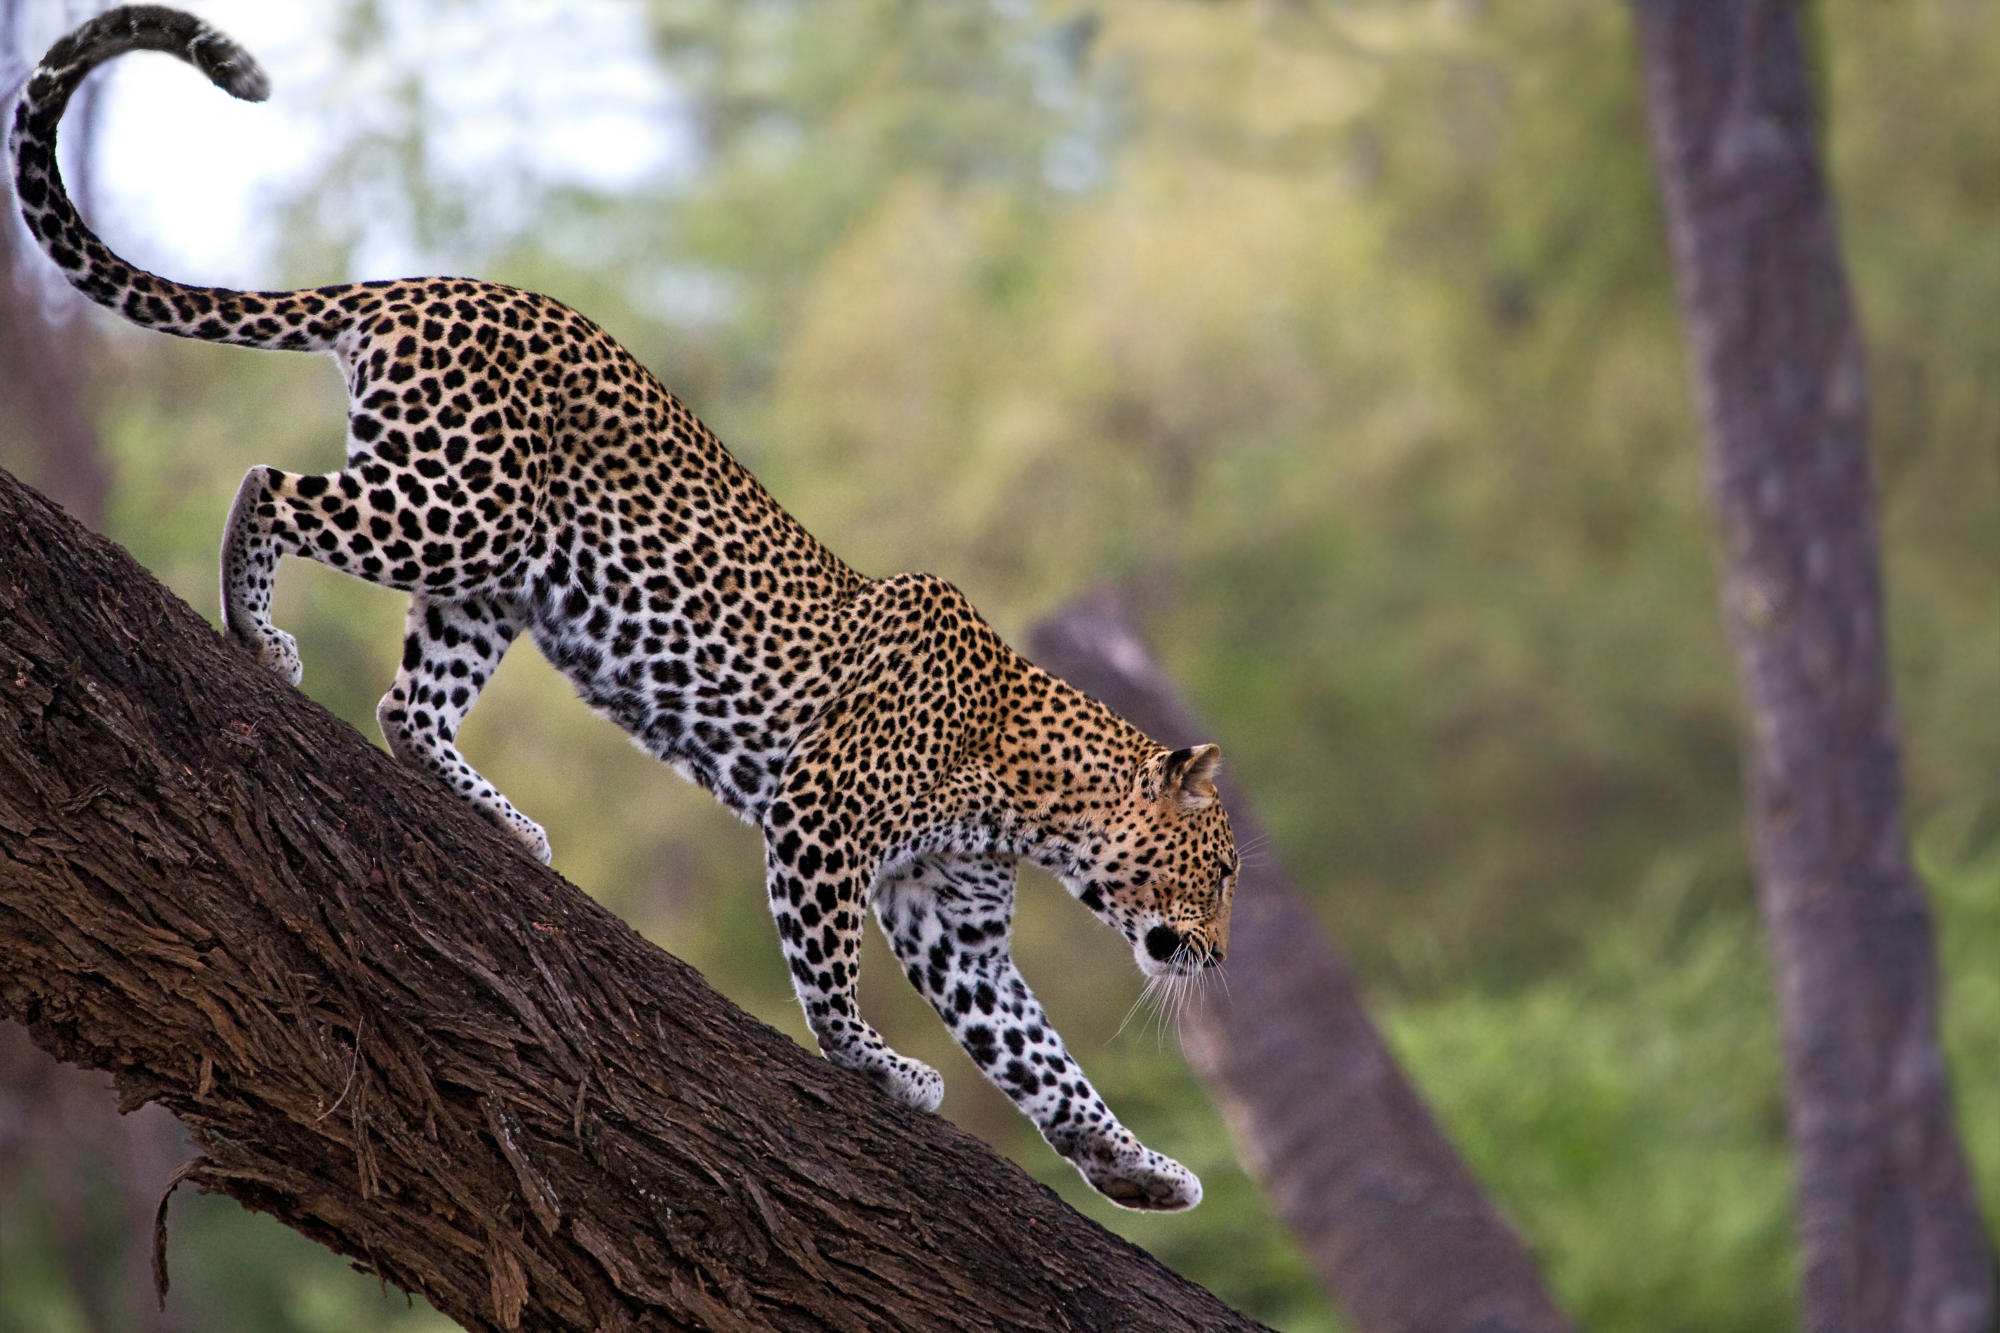 The Astonishing Lifespan of the African Leopard